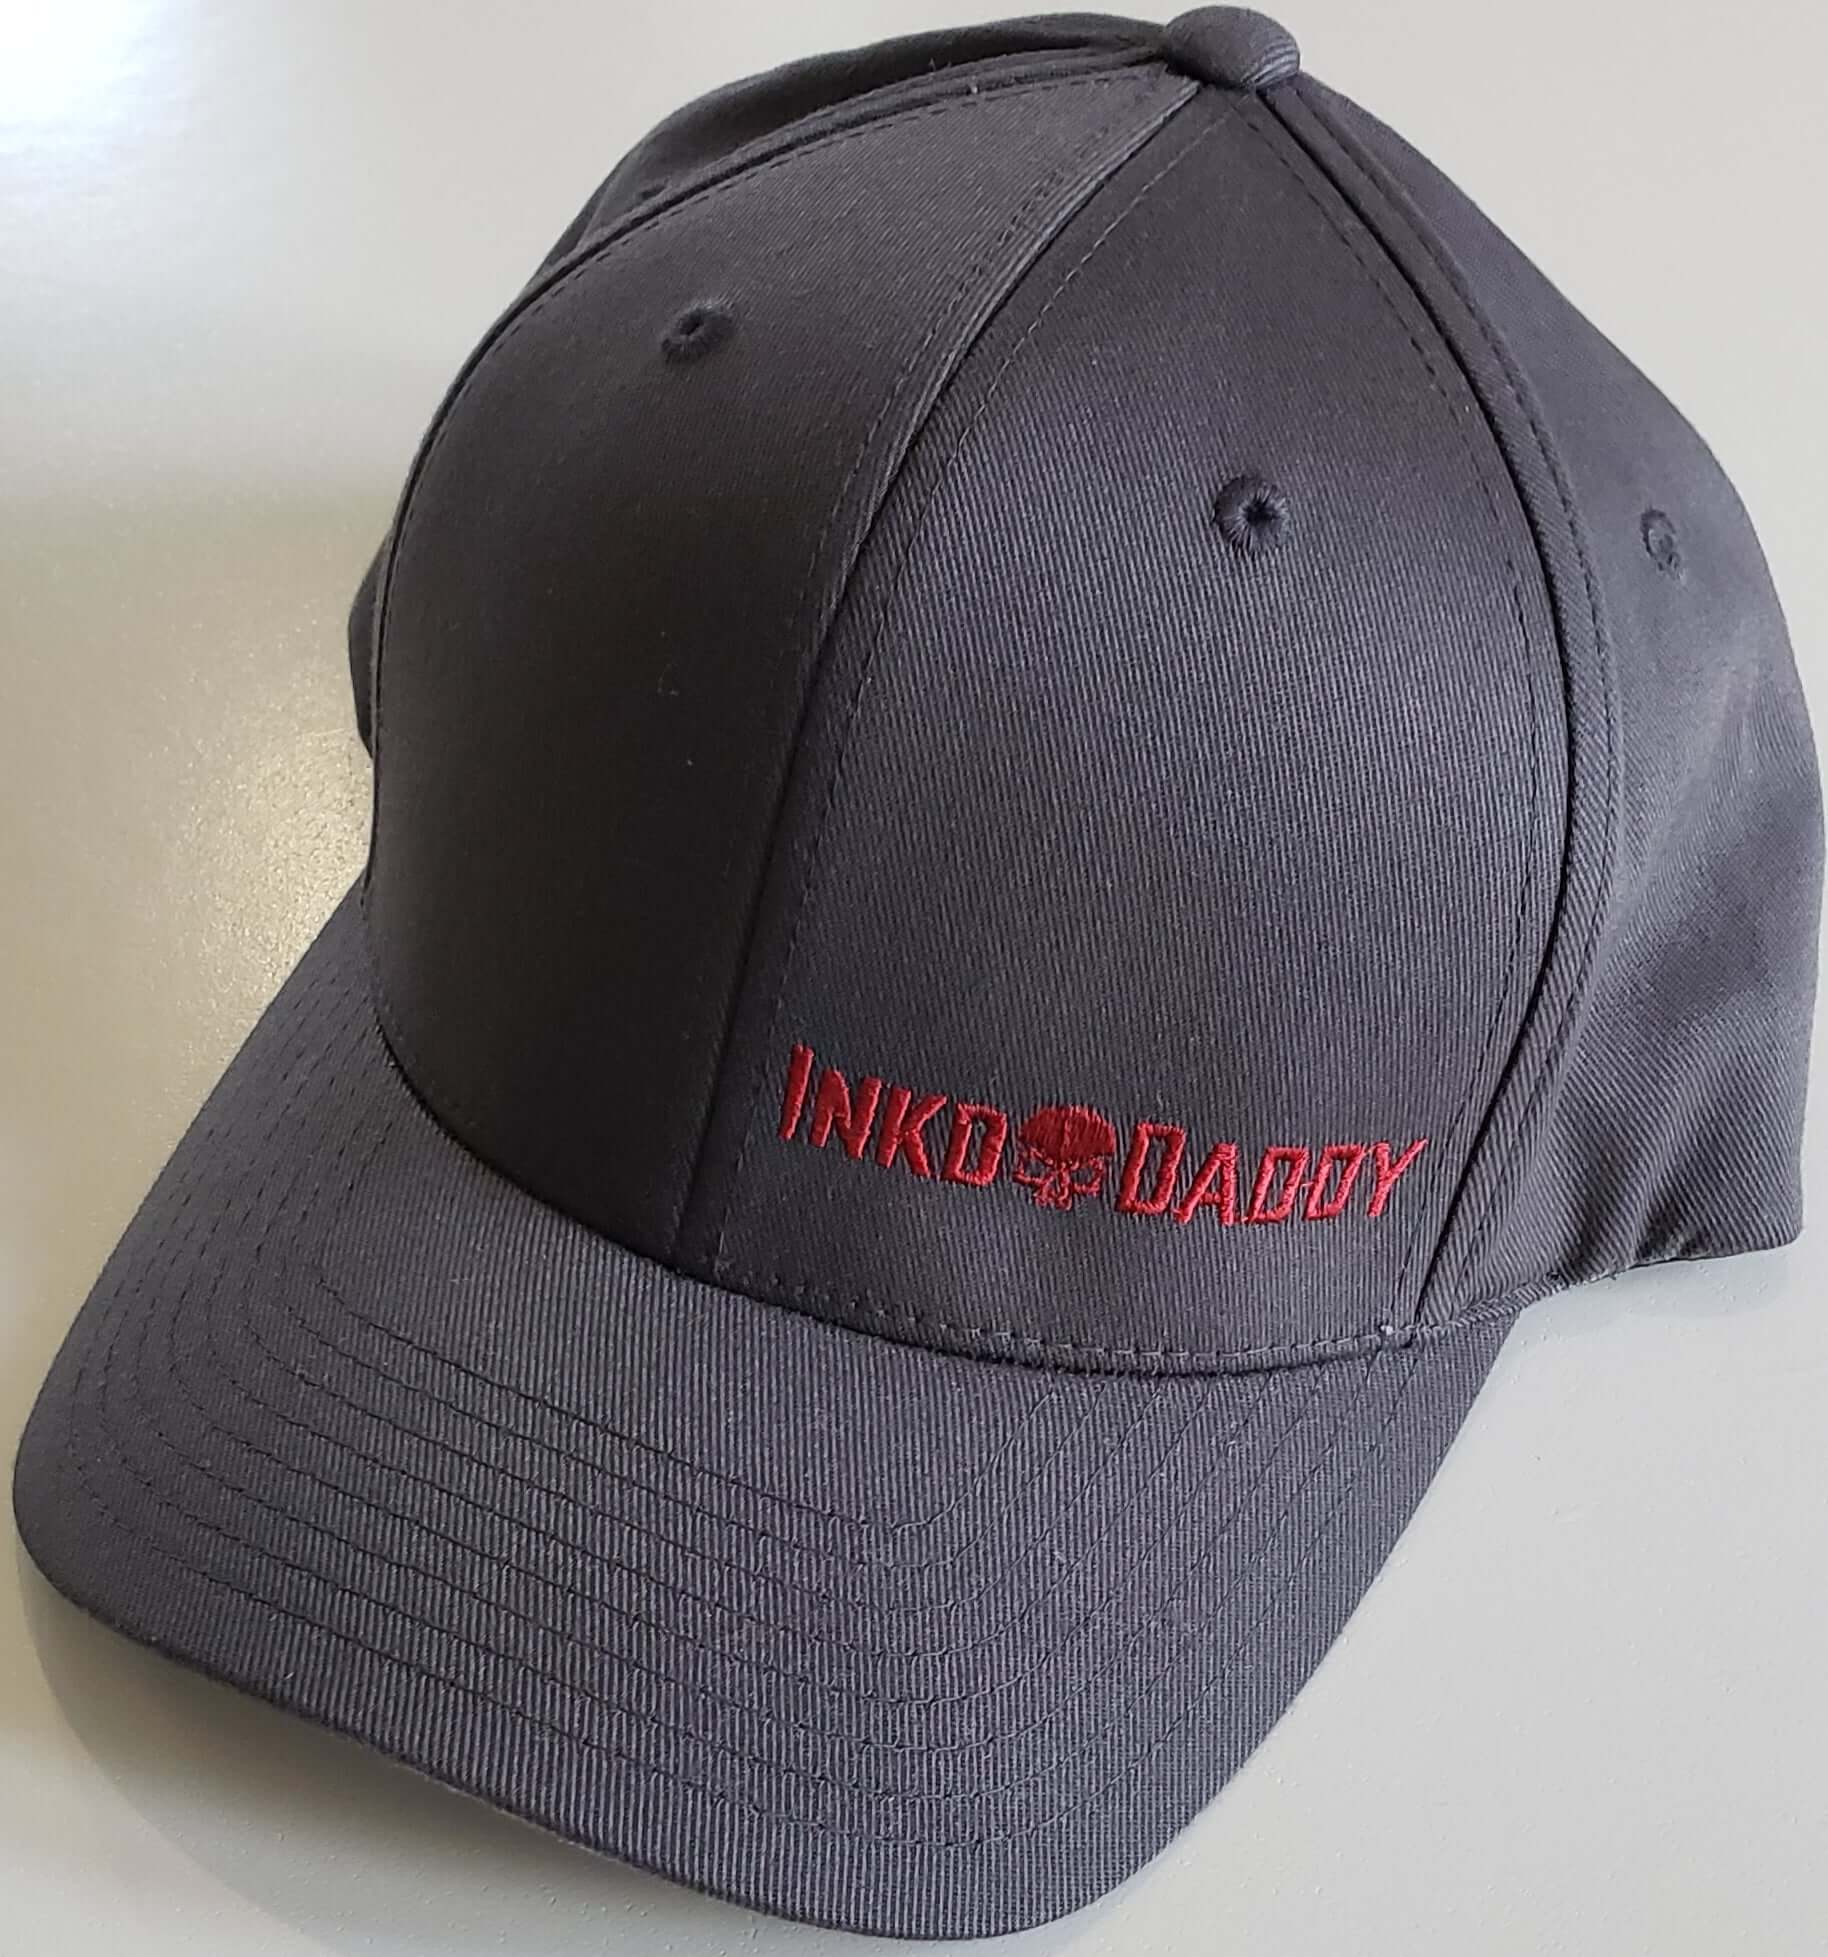 Inkddaddy skull on hats and shirts multiple colors